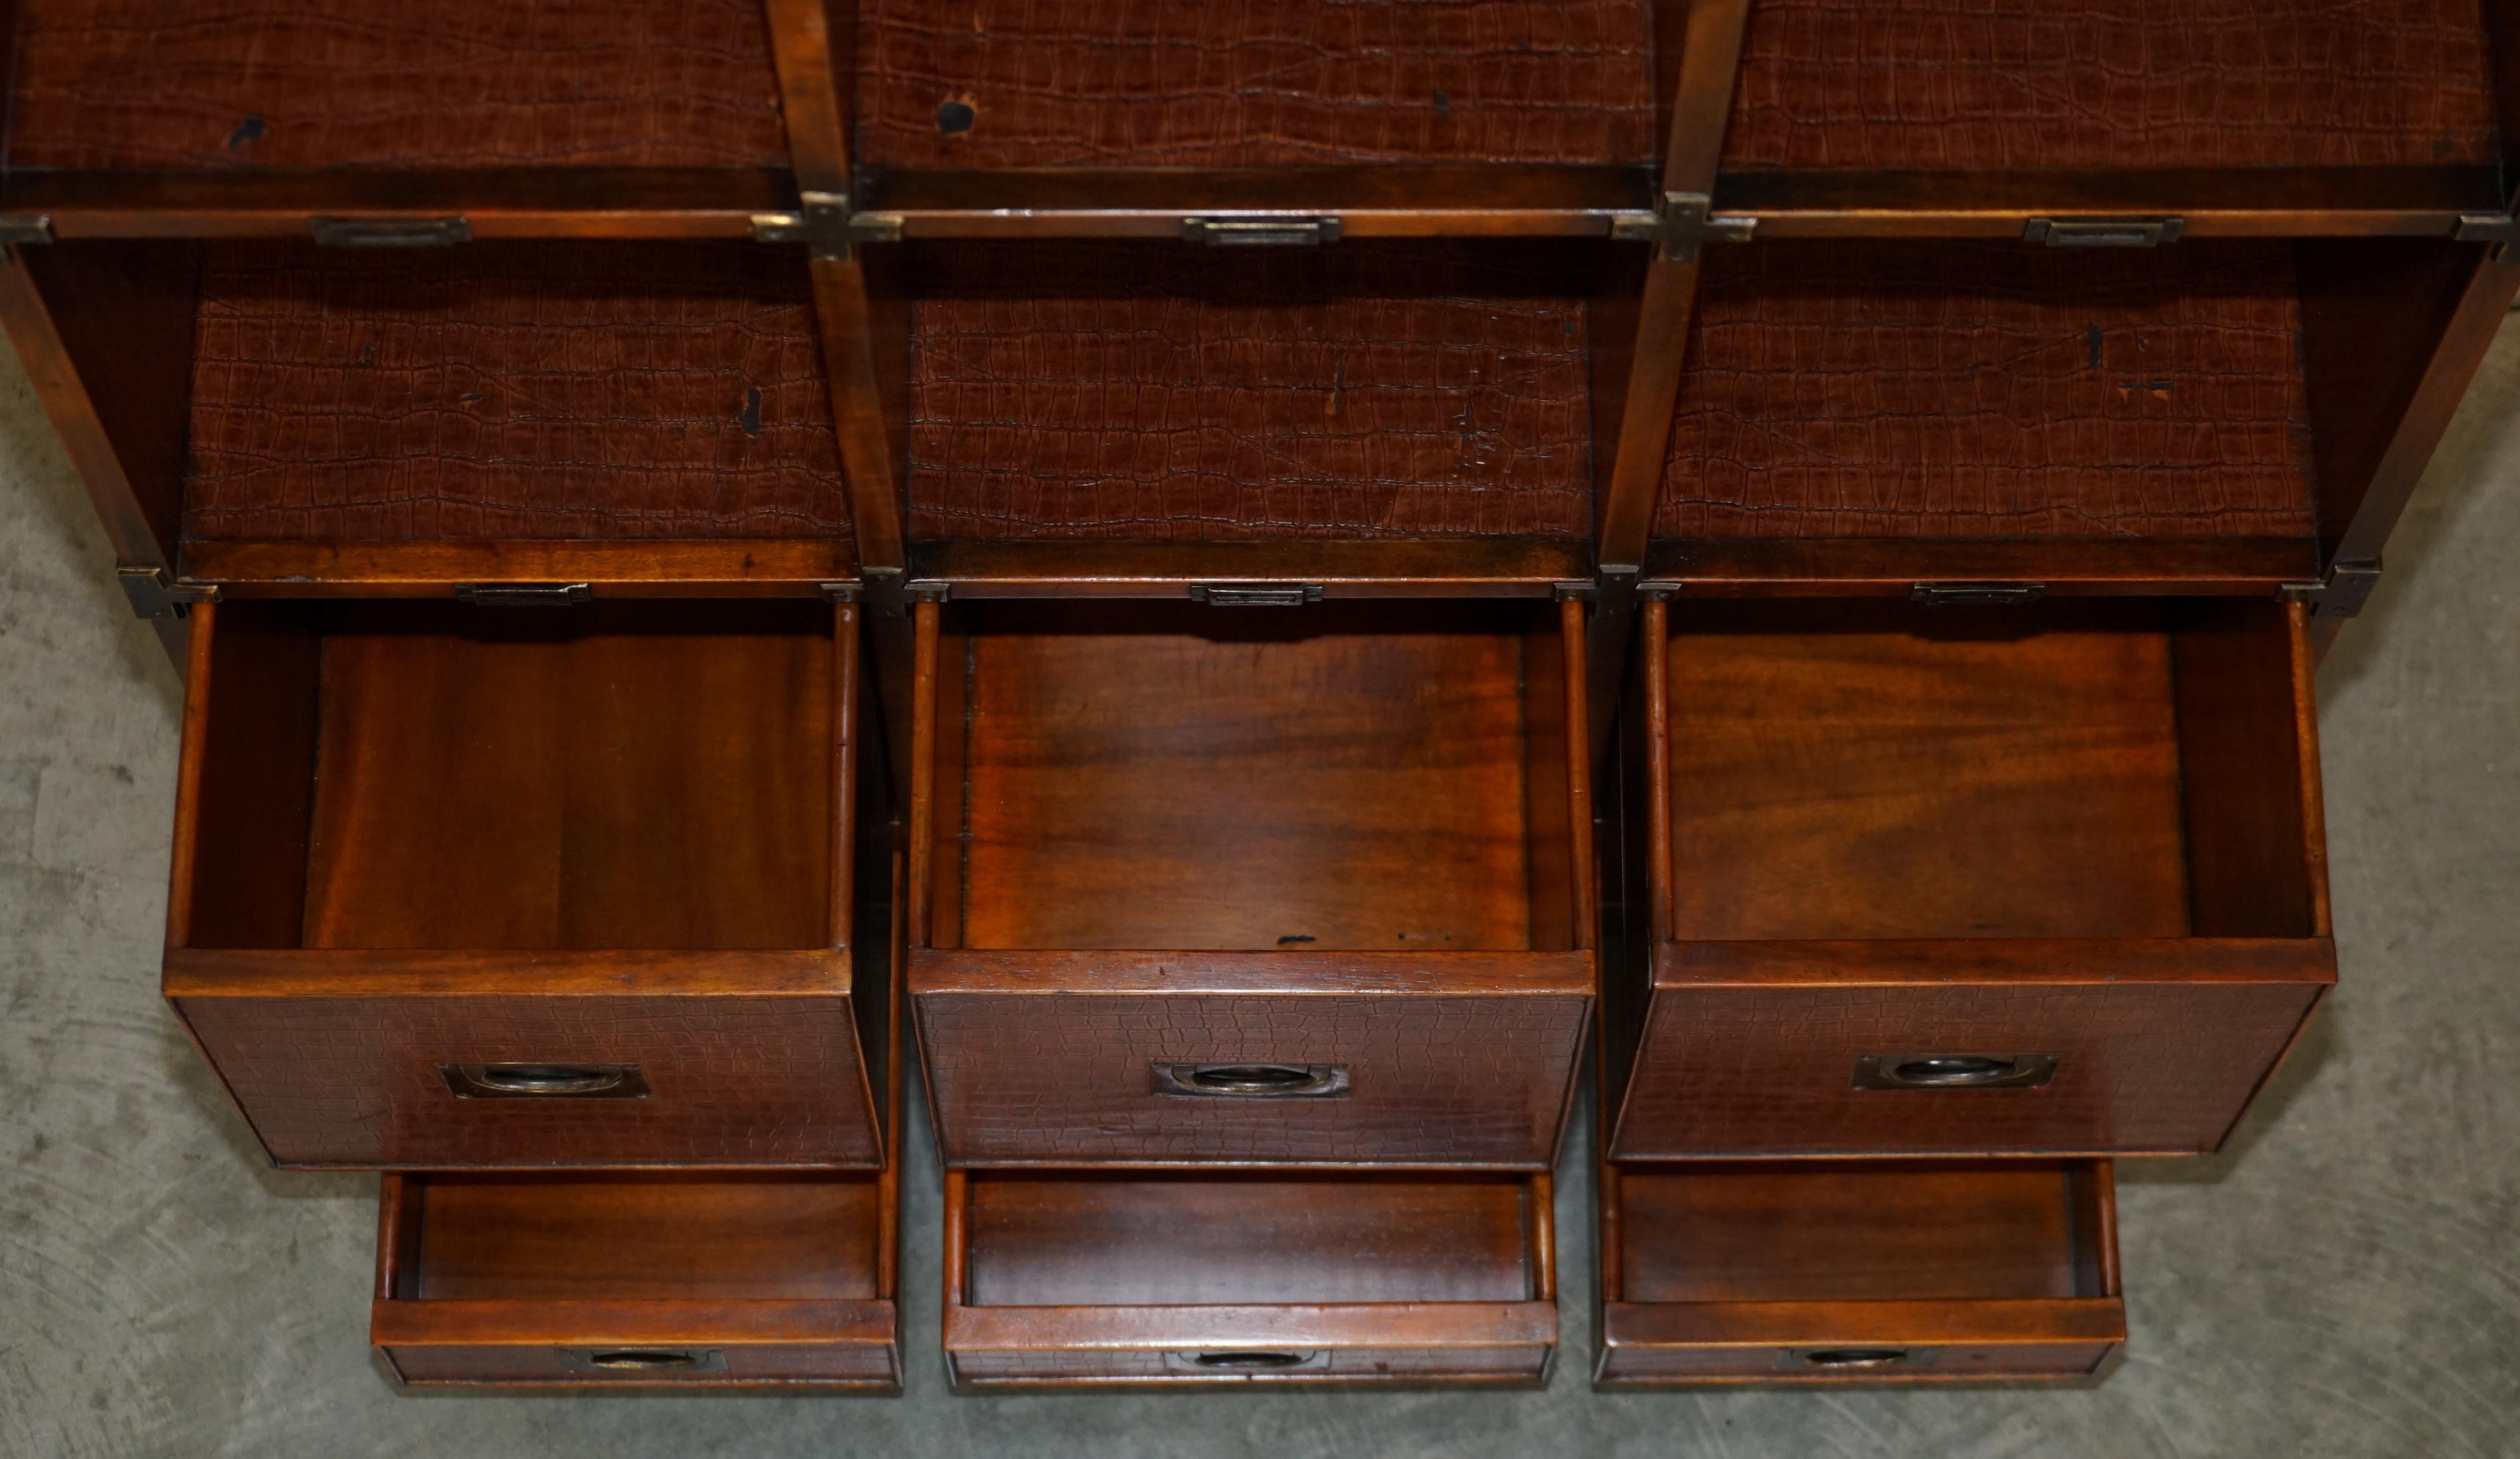 PAIR OF CROCODILE LEATHER Offene LiBRARY-BOOKCASES MIT DRAWERS & RECORD SLOTS im Angebot 6